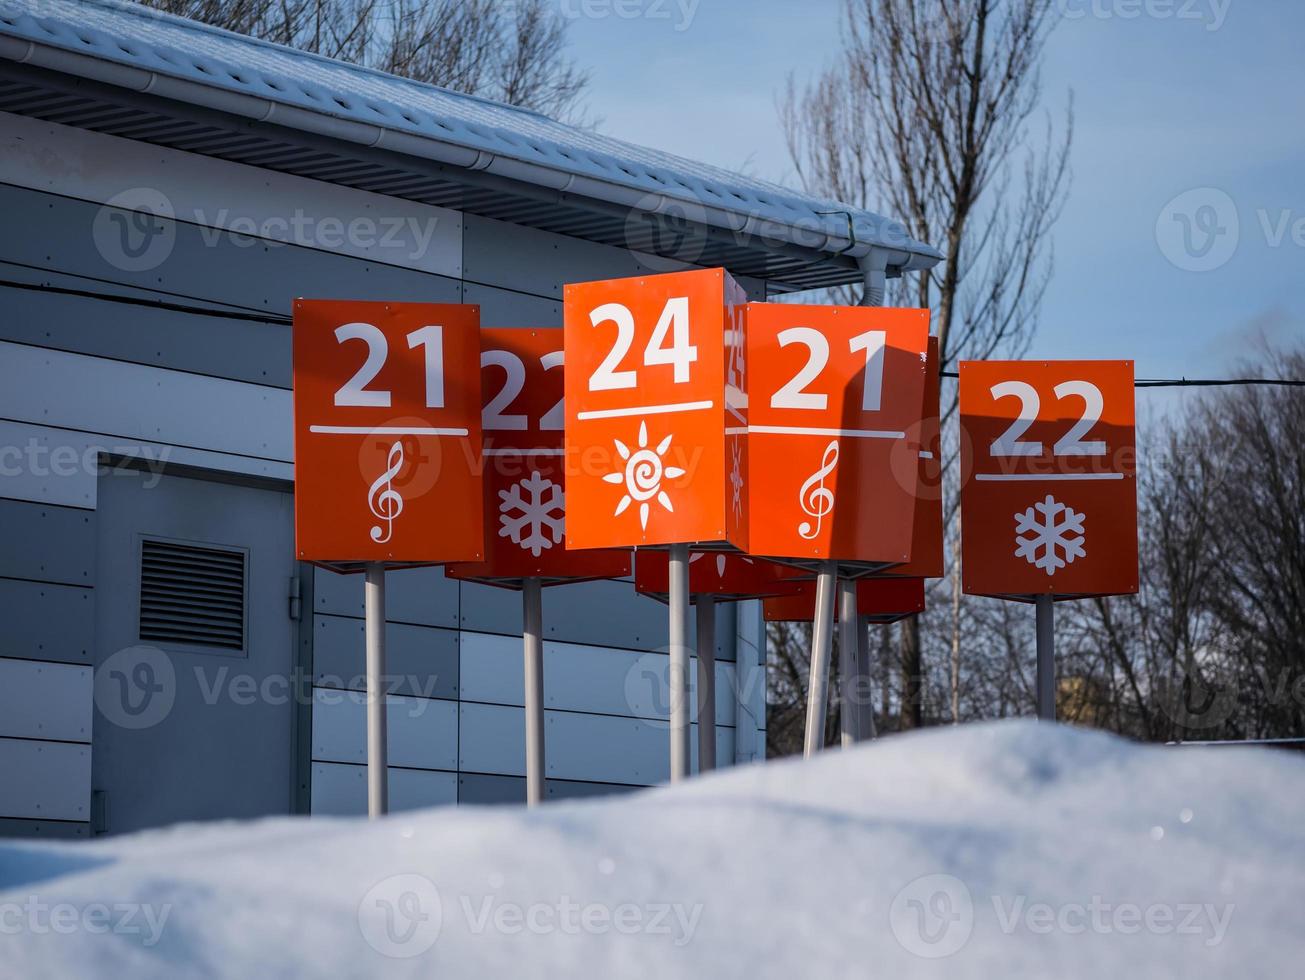 Orange signs are in the Parking lot of the store photo